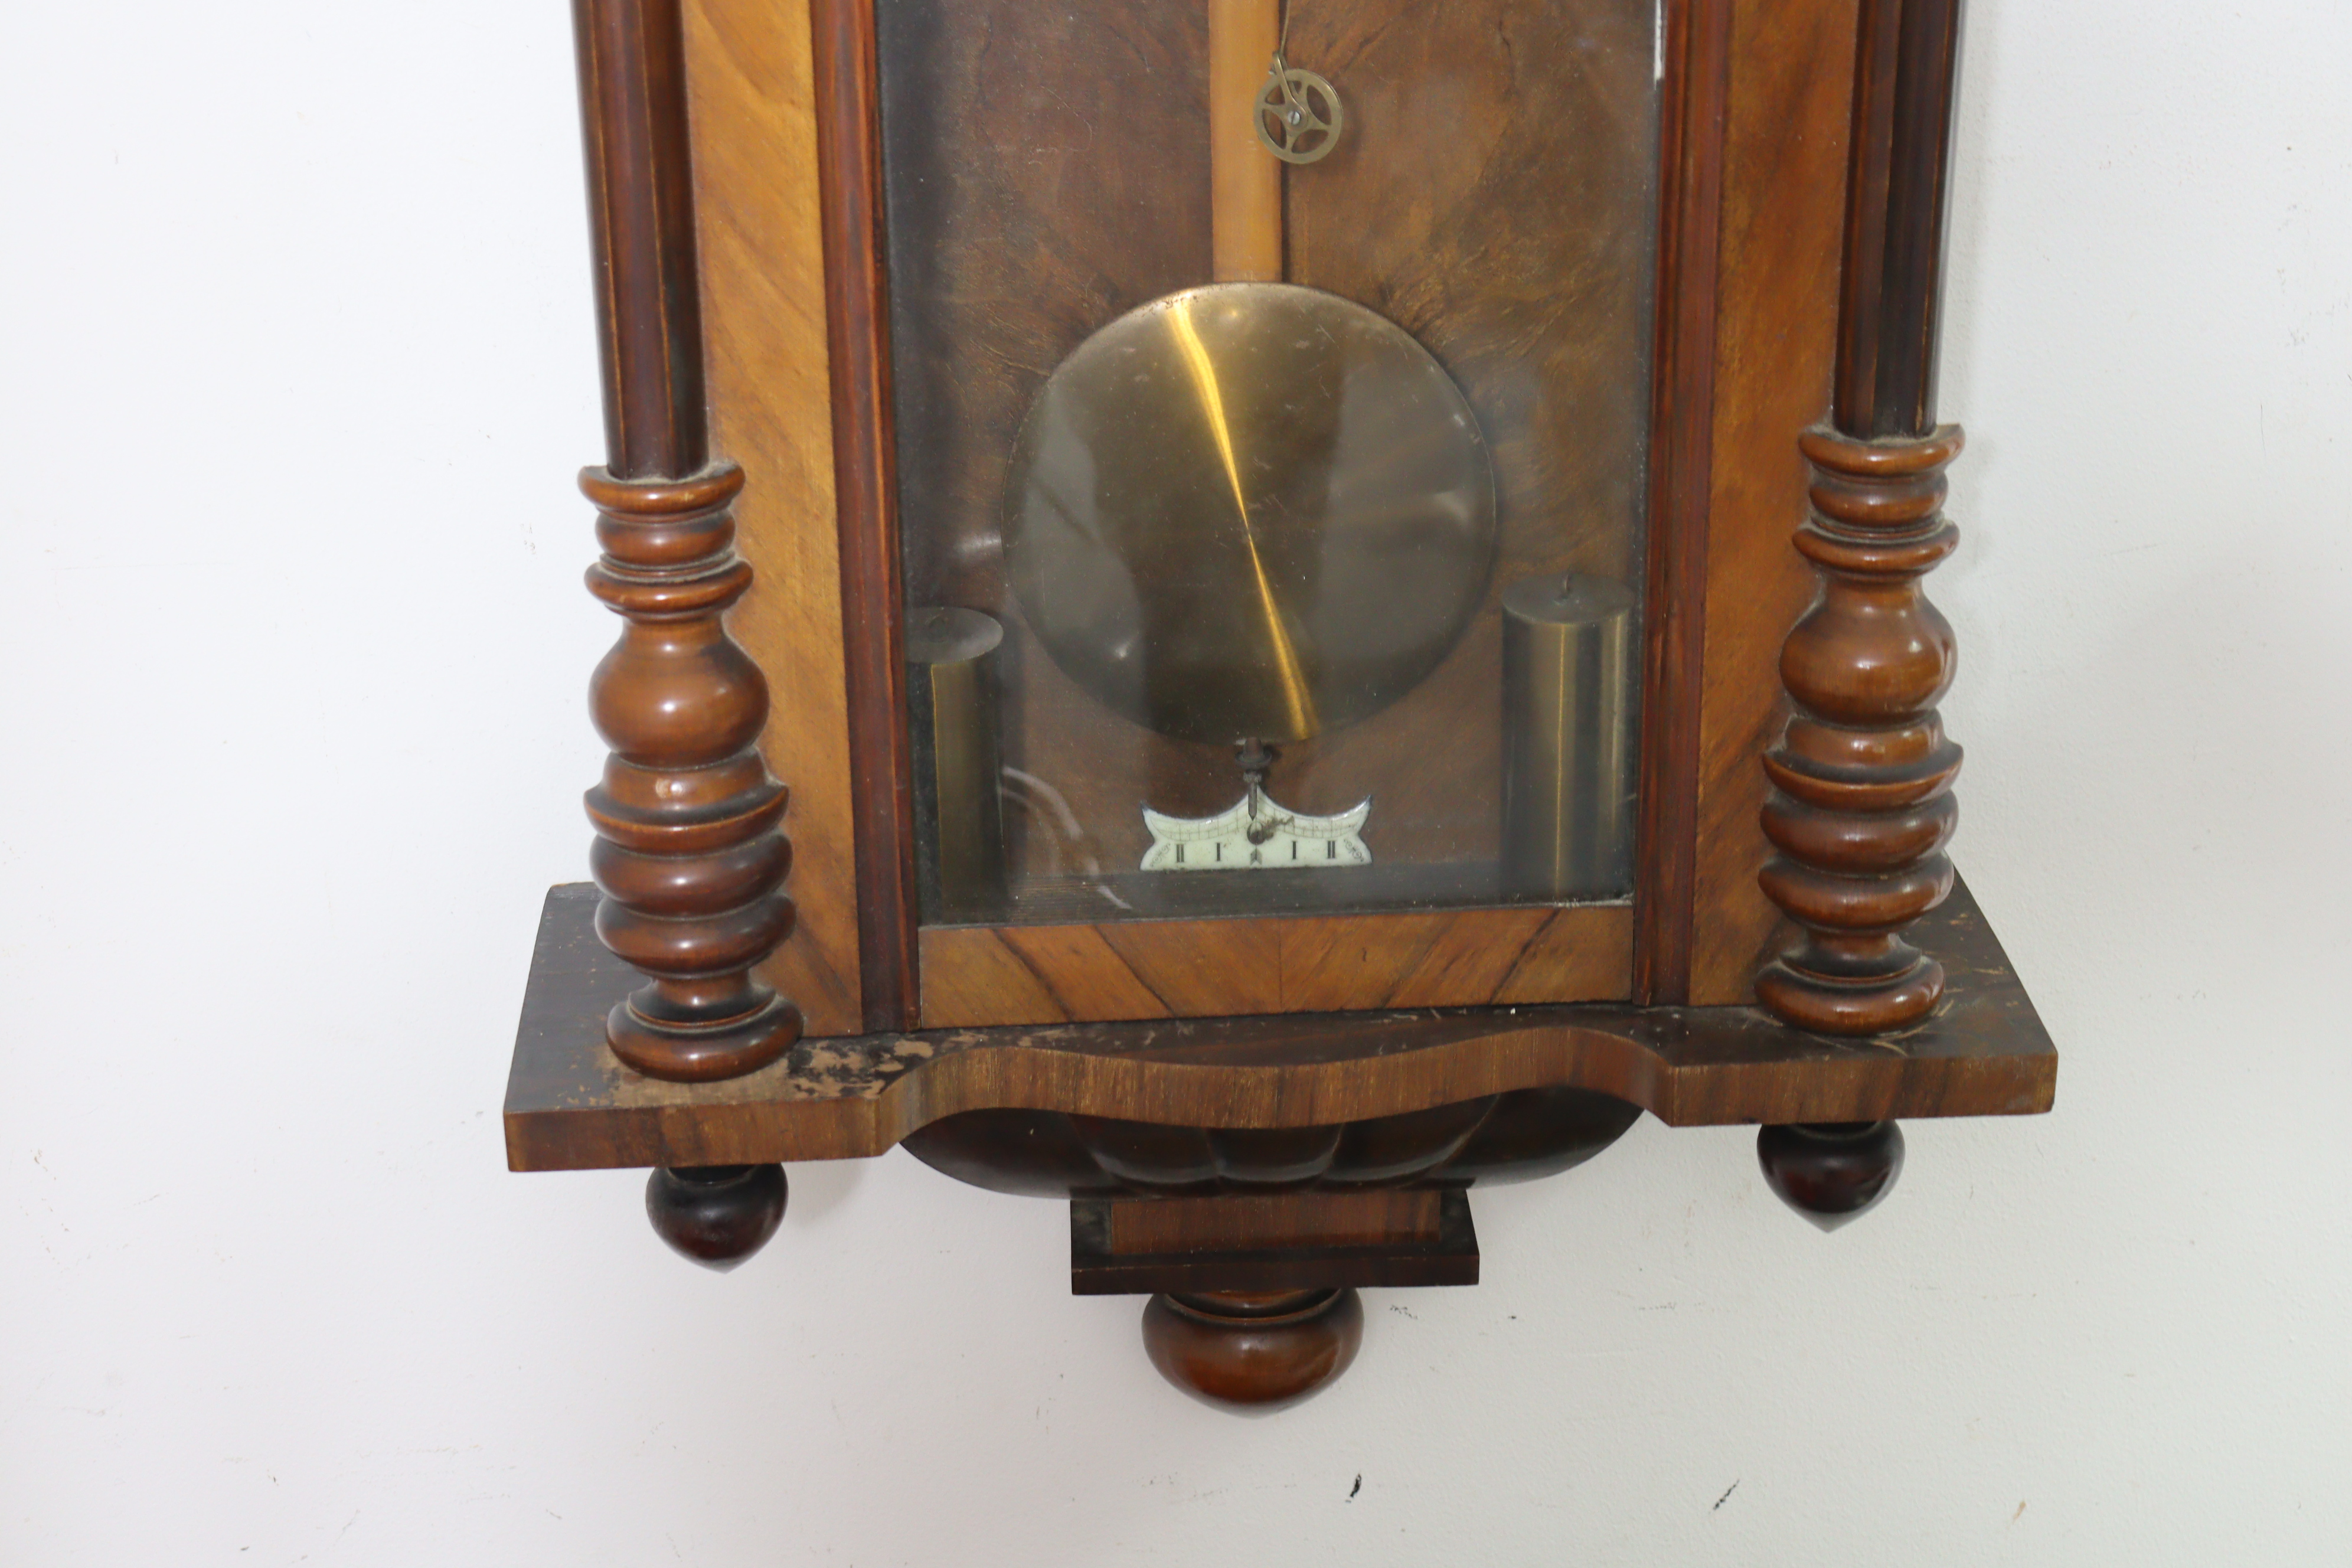 A 19th century Vienna wall clock with a two-part dial, & in a walnut case enclosed by a glazed door, - Image 5 of 5